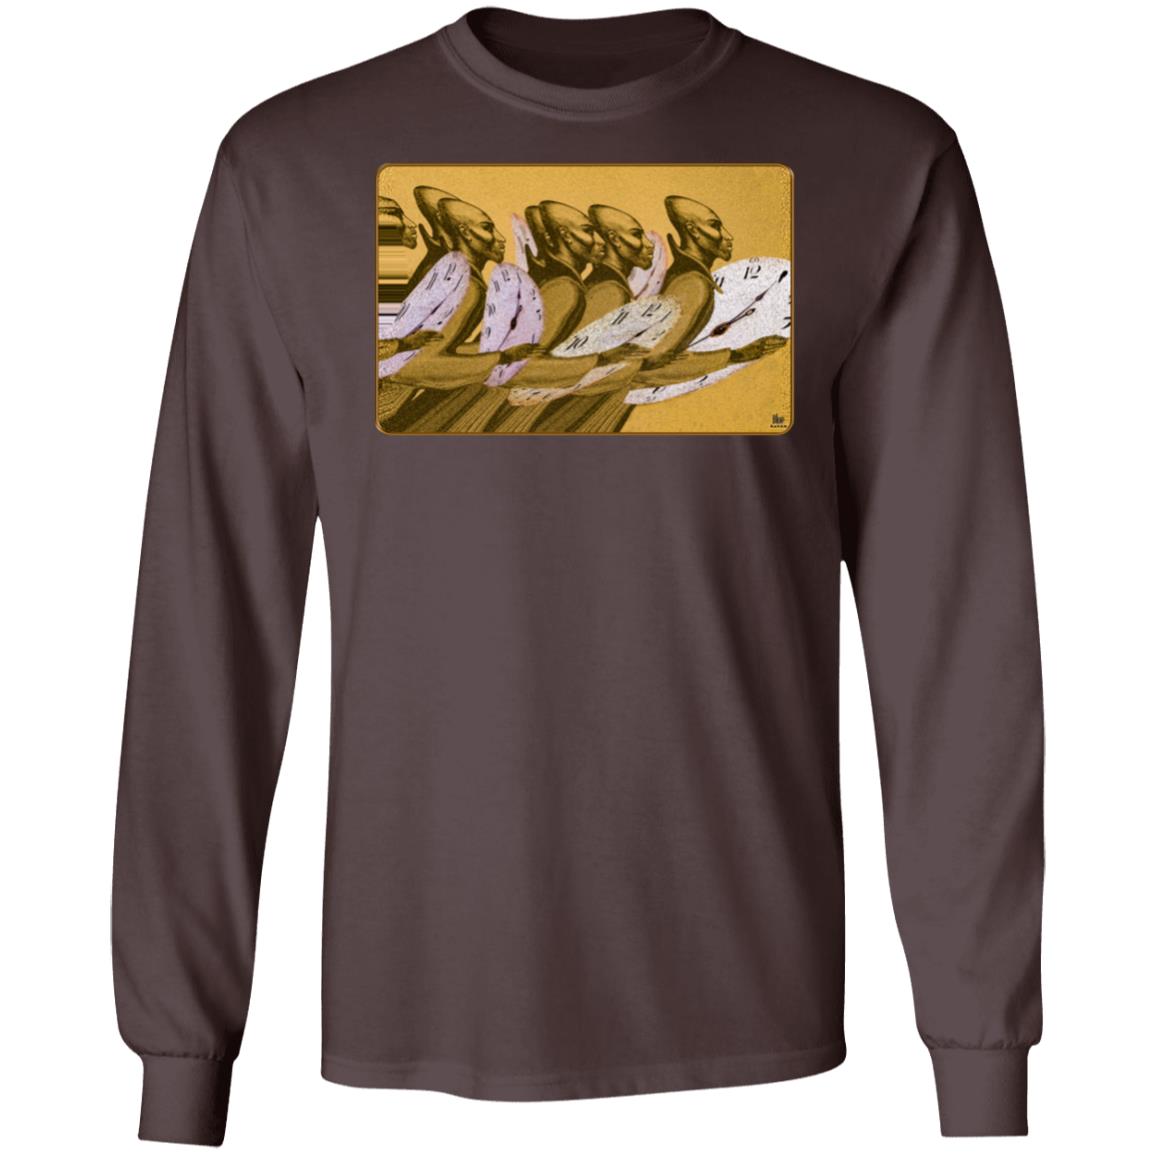 Time Marching On - Gold - Men's Long Sleeve T-Shirt